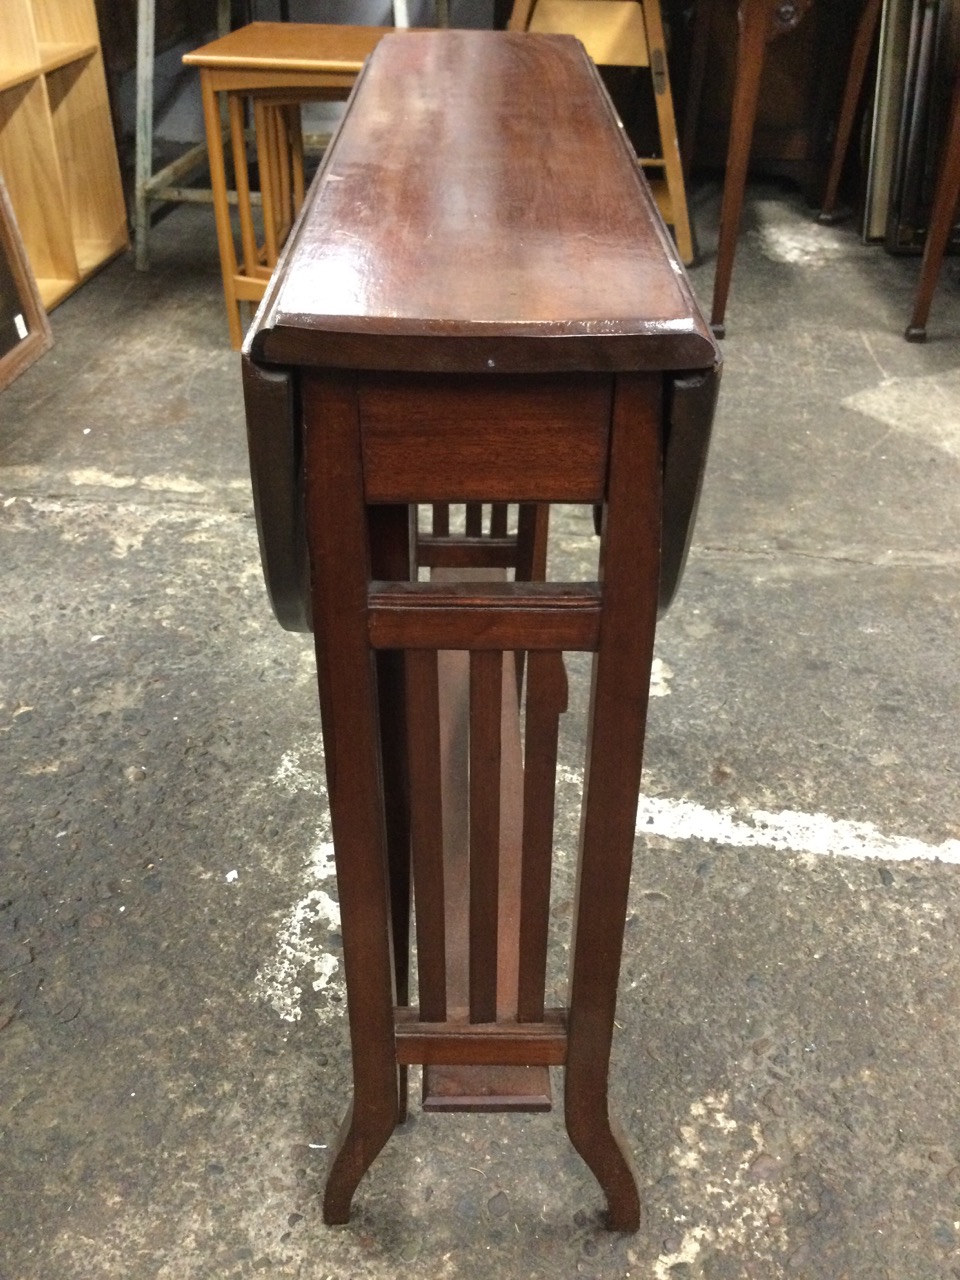 An Edwardian mahogany sutherland table with oval moulded top and two leaves supported on swing legs, - Image 3 of 3